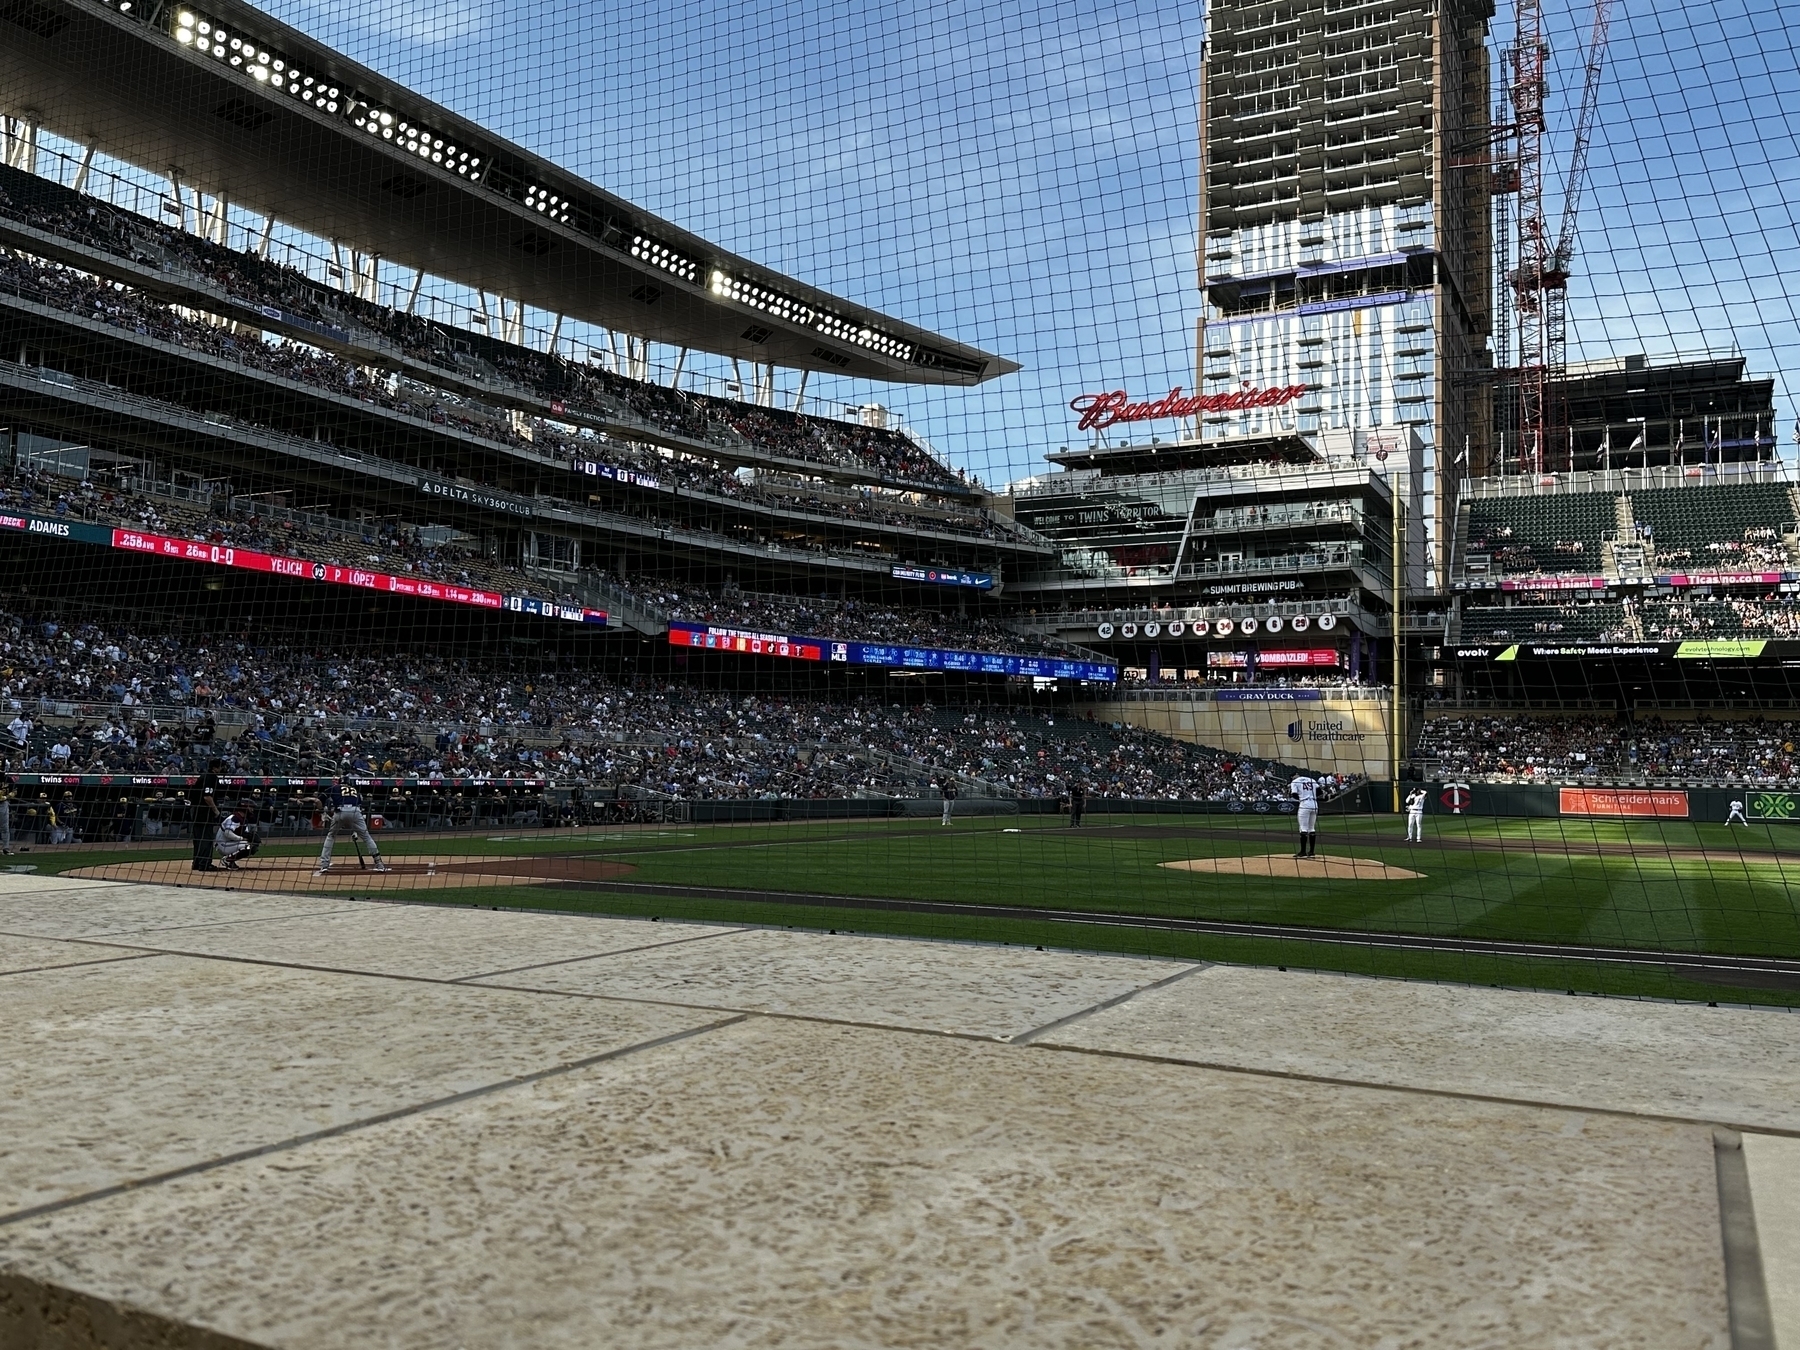 Twins Brewers baseball game viewed from close seats.